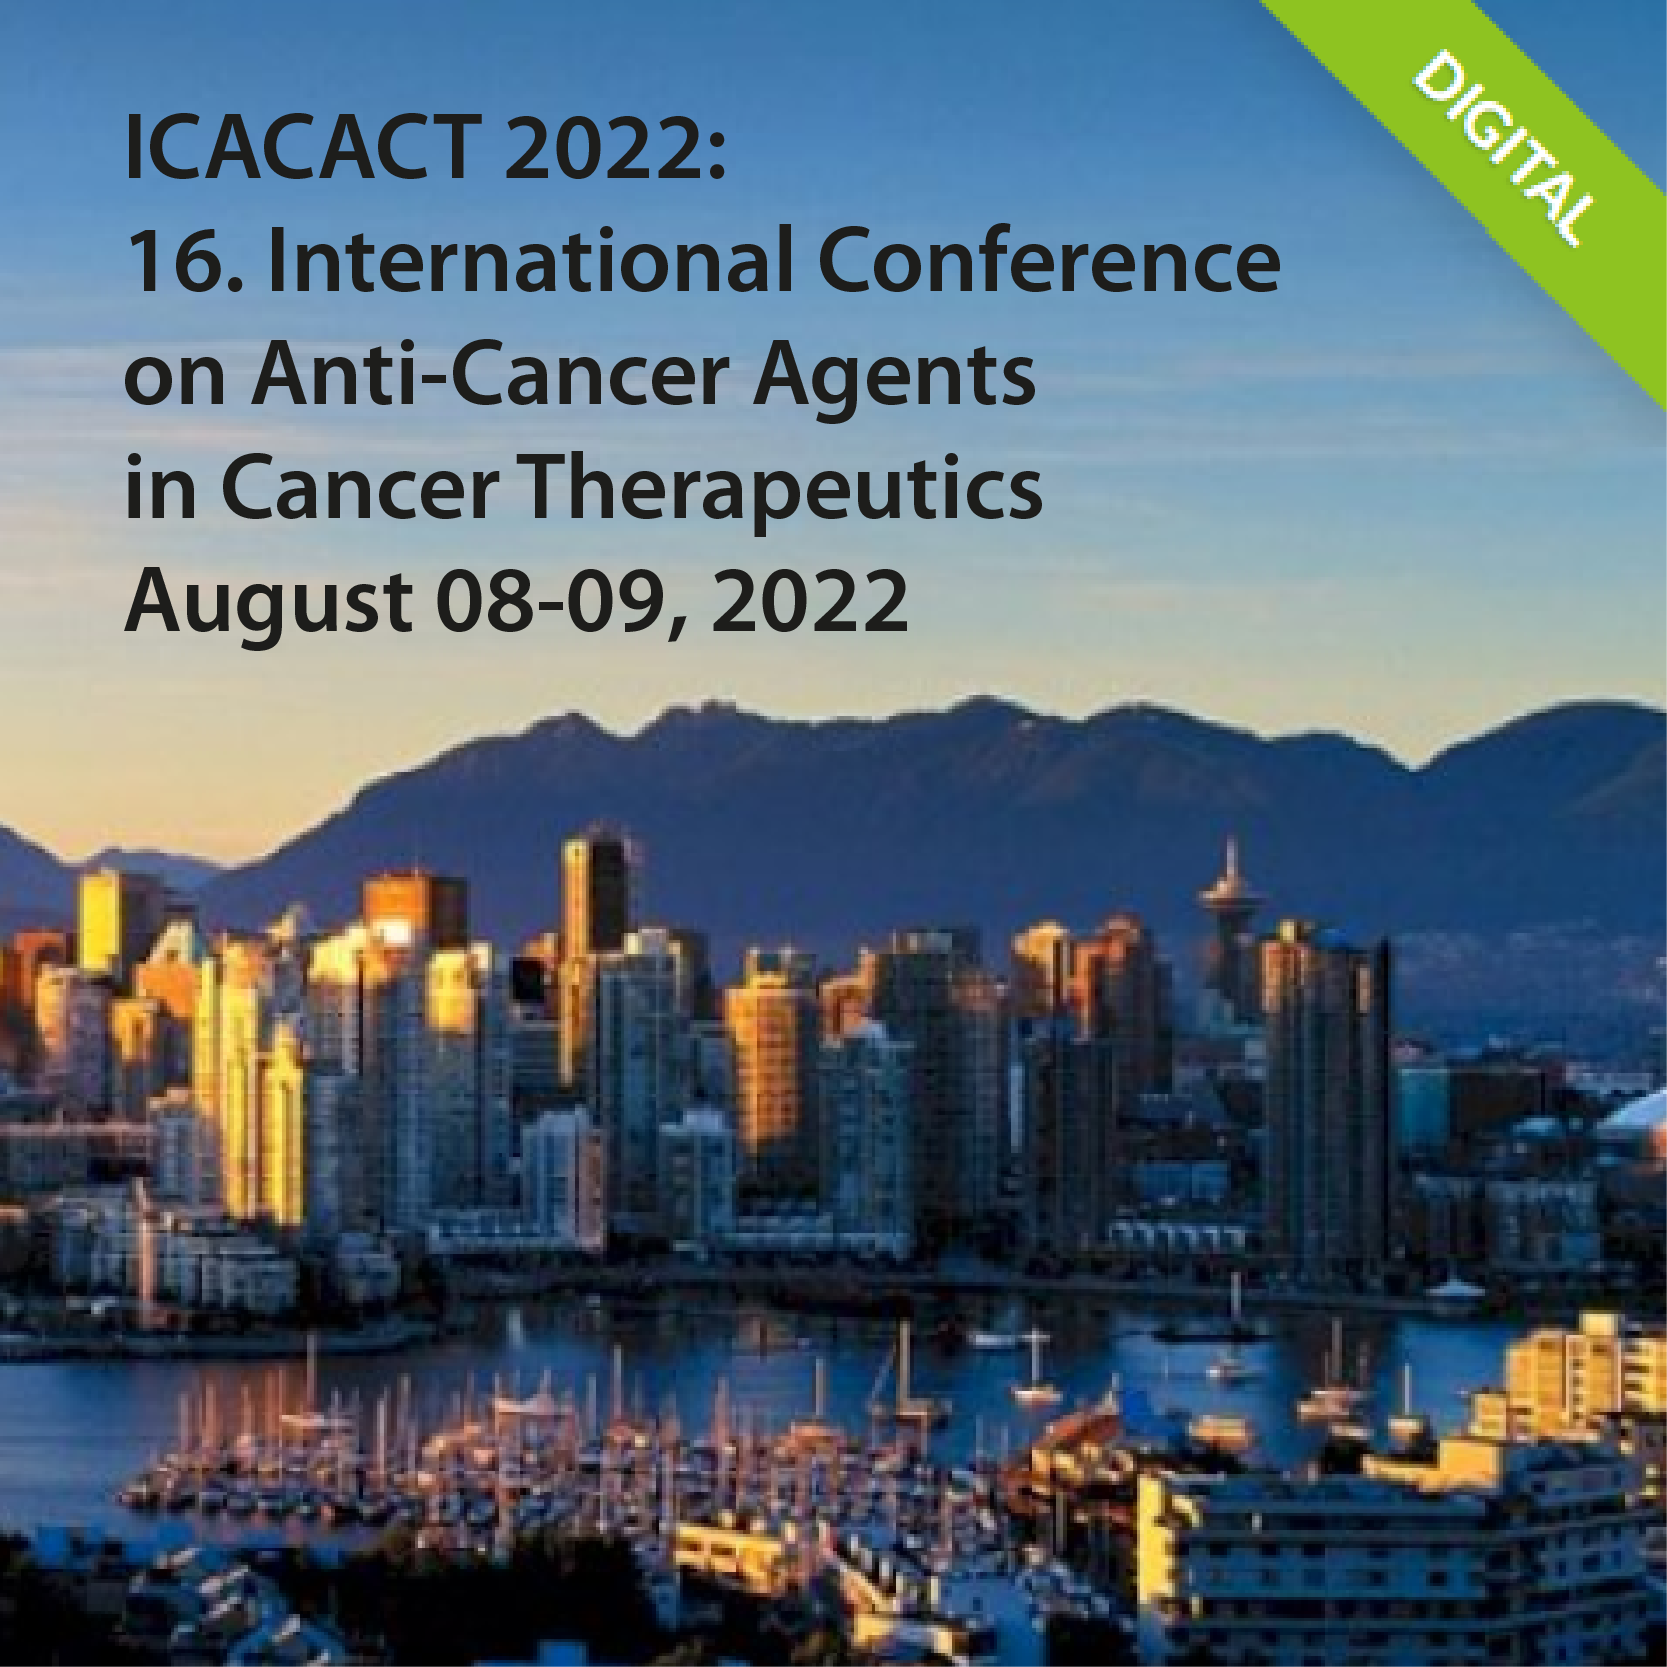 ICACACT 2022: 16. International Conference on Anti-Cancer Agents in Cancer Therapeutics